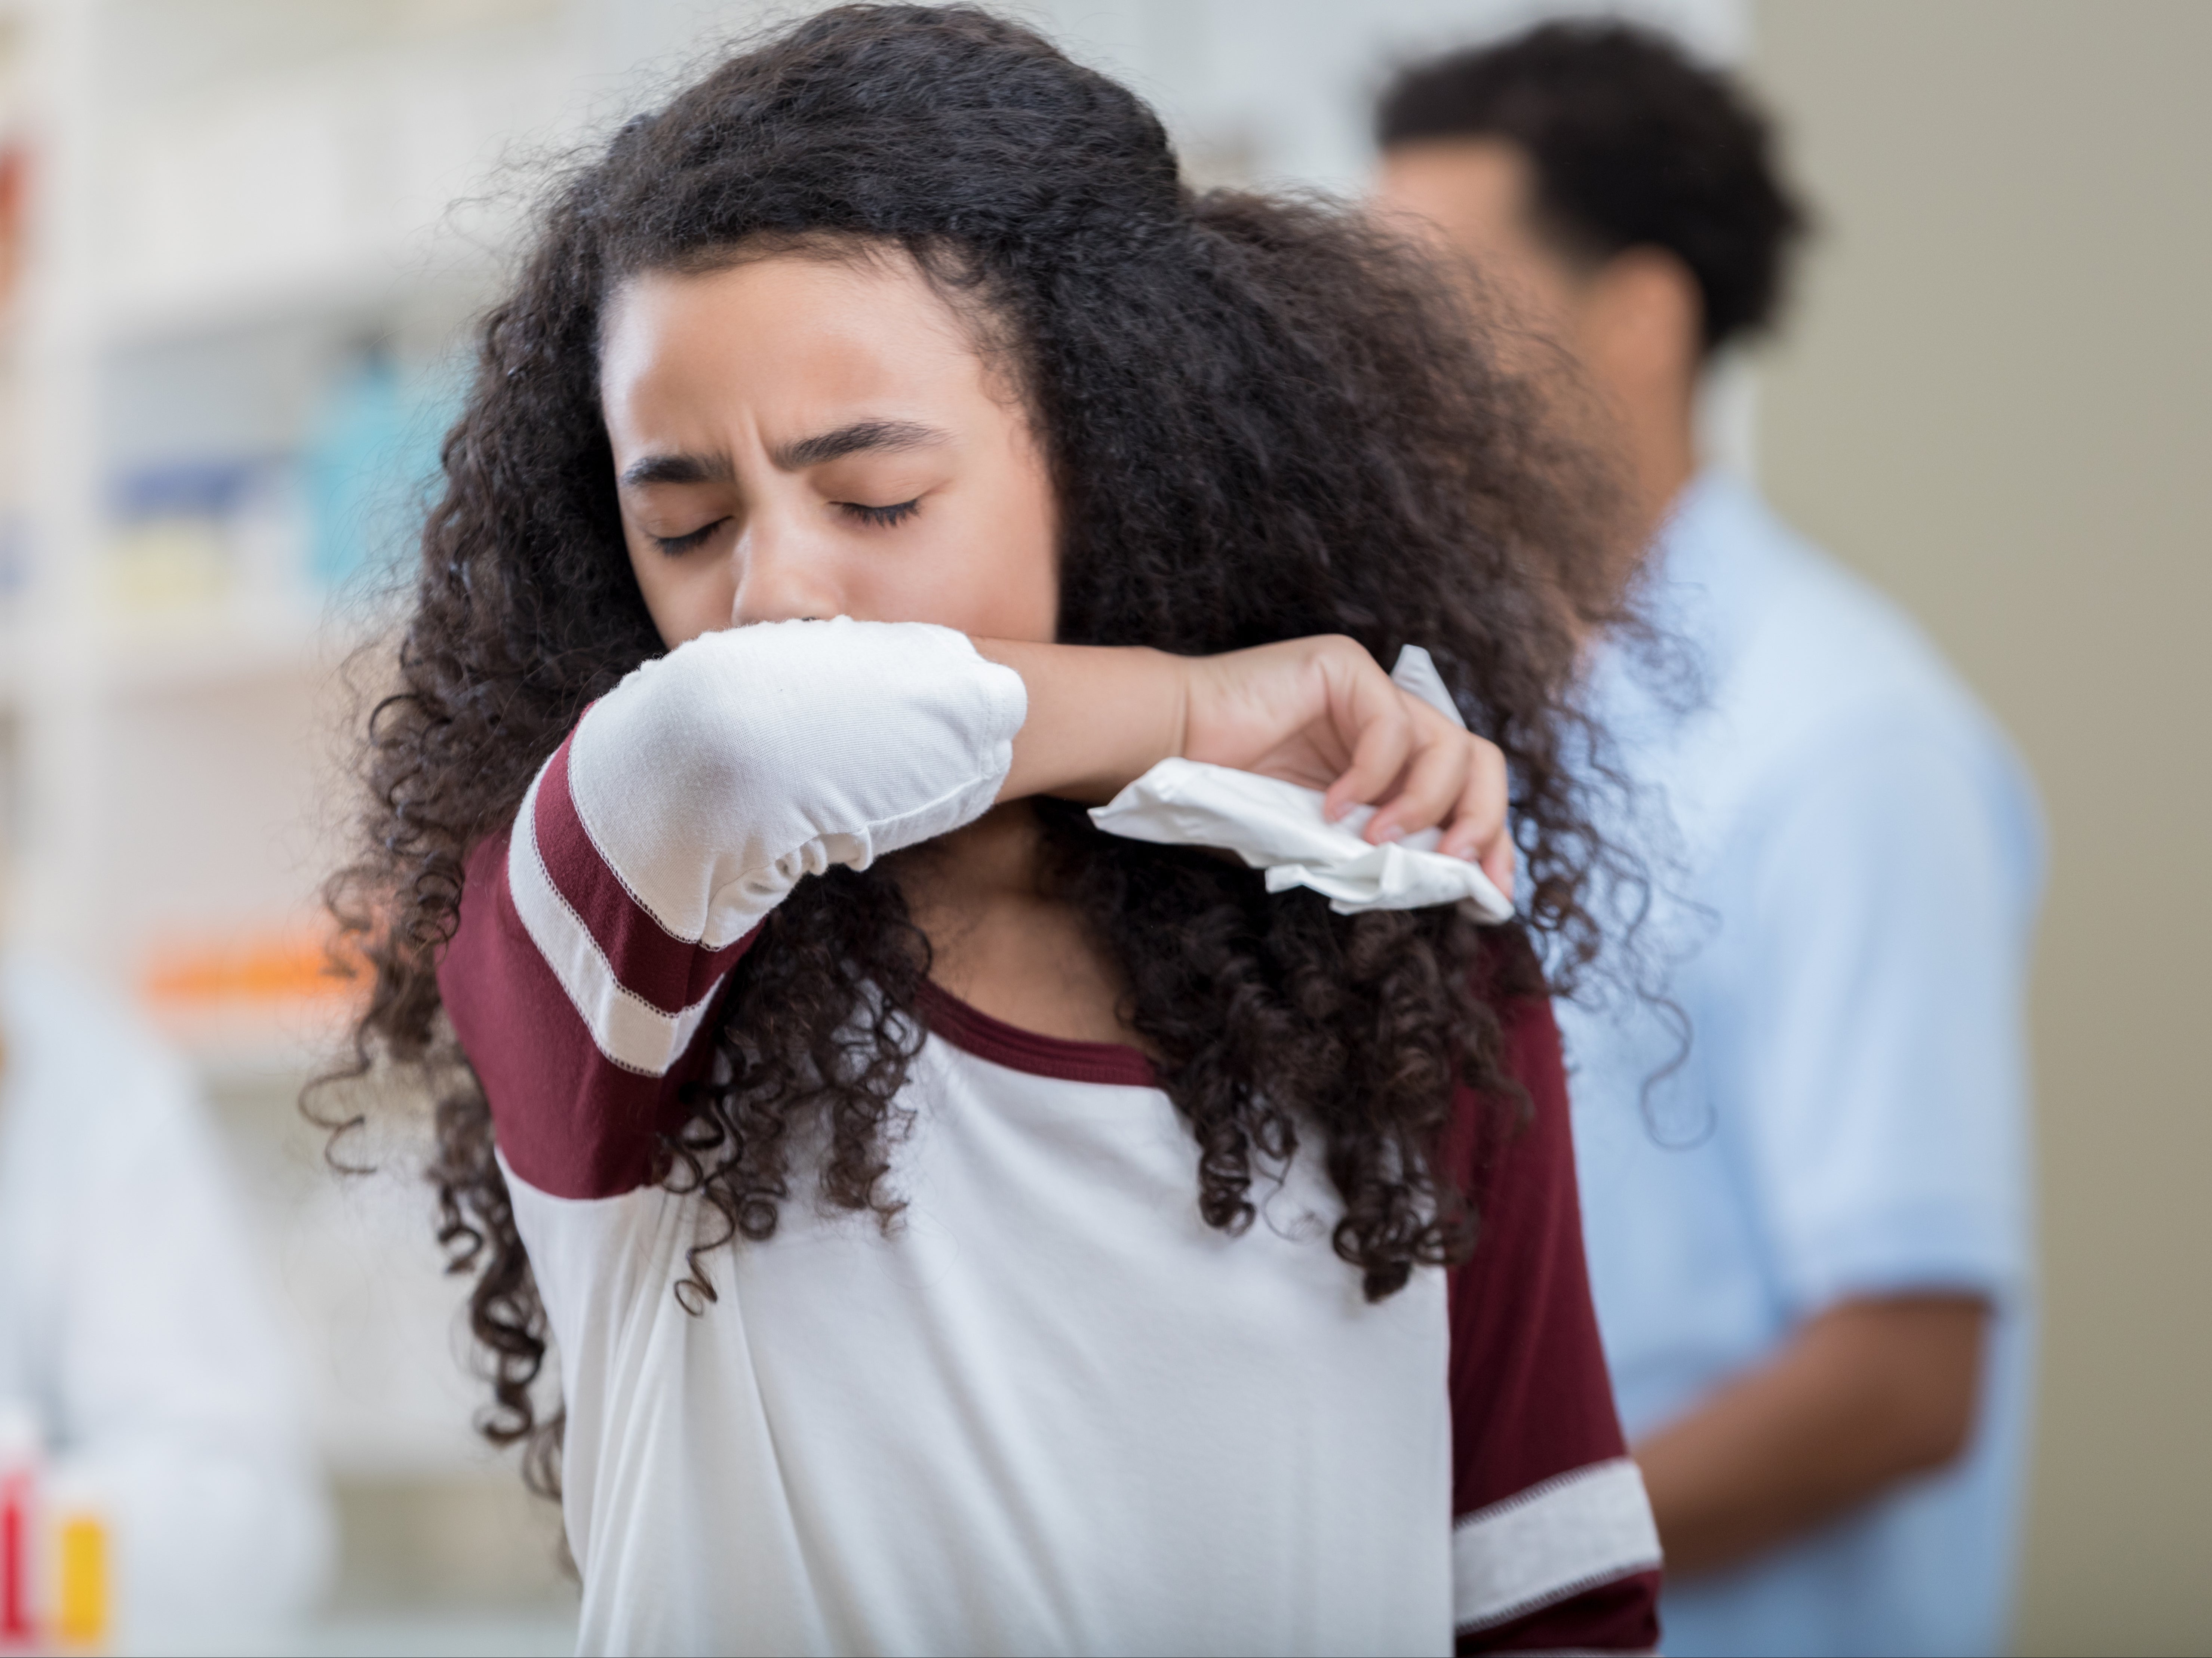 Flu spreads quickly and easily among school pupils